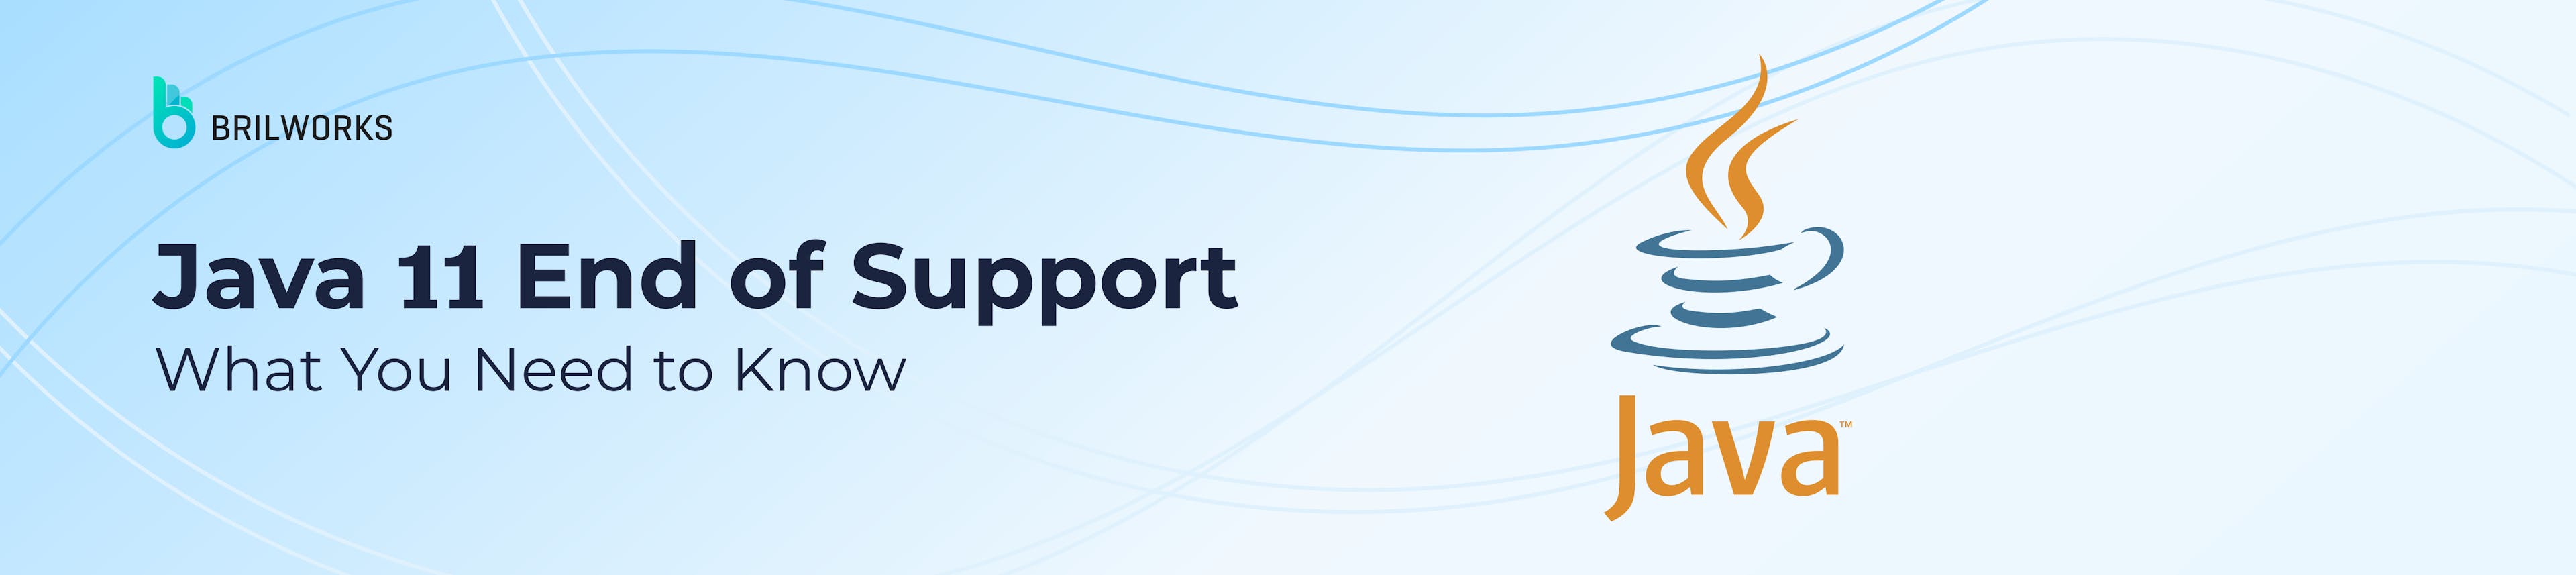 Banner-Java-11-end-of-support